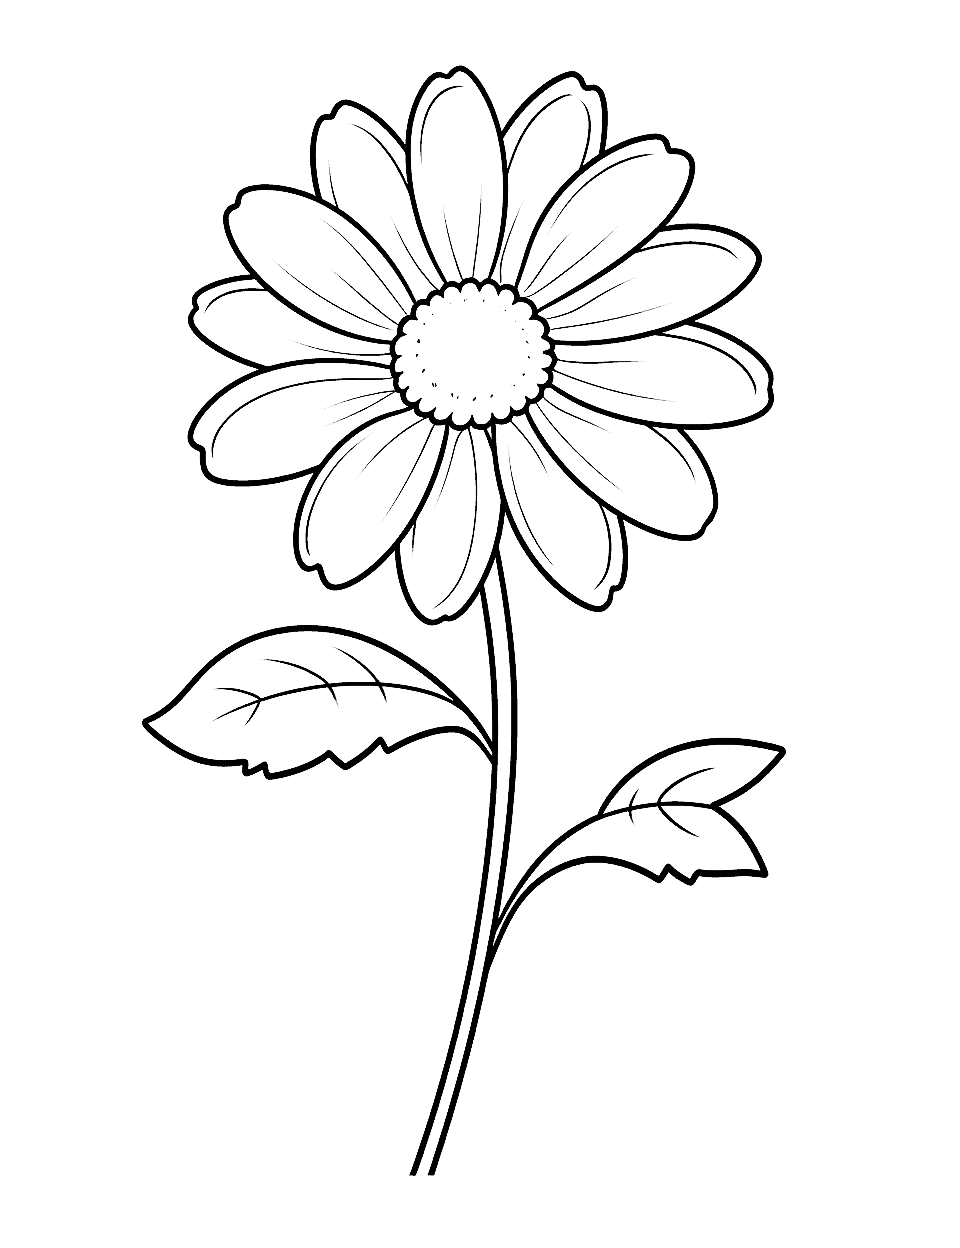 Easy Daisy Flower Coloring Page - A simple, large daisy flower coloring page. Ideal for beginners and kindergarteners.